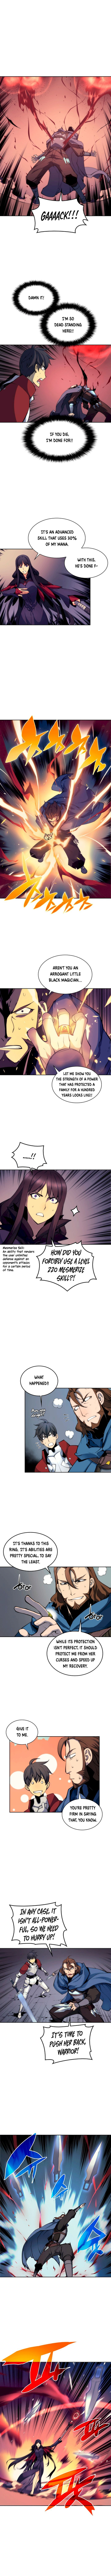 Overgeared (Team Argo) - Chapter 6 Page 3